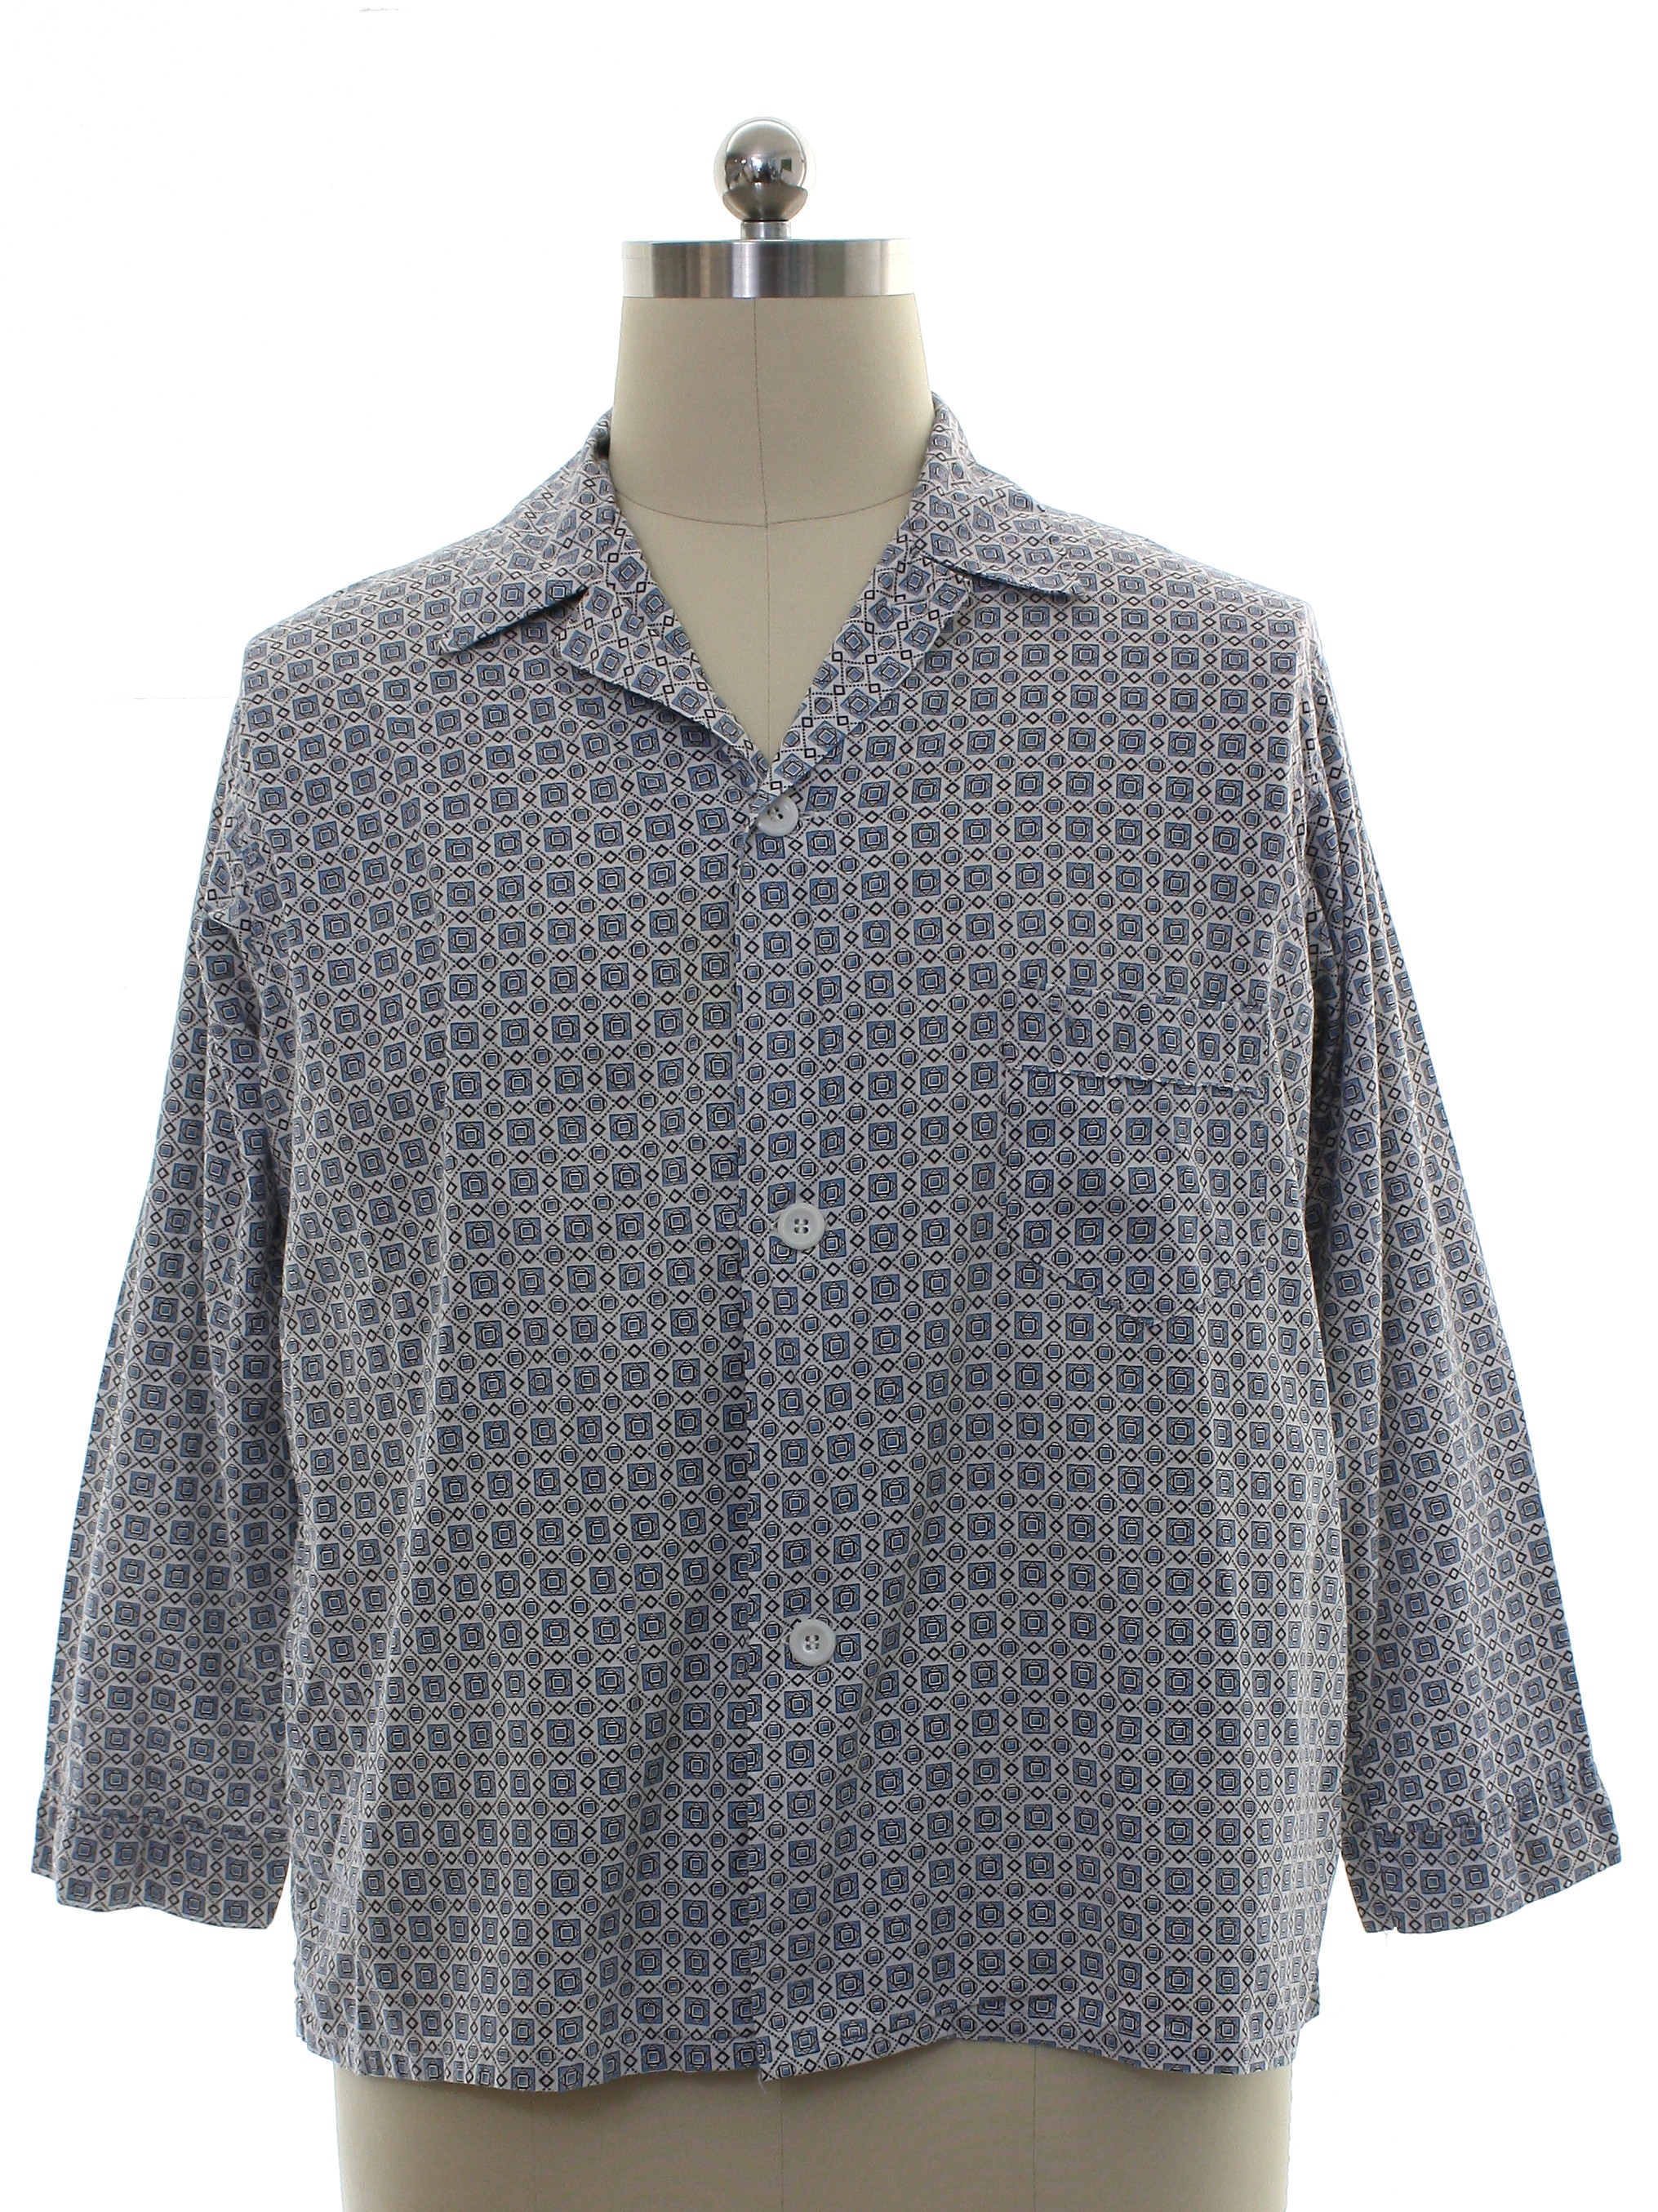 Retro Fifties Shirt: 50s -Penneys Wash and Wear- Mens white background ...